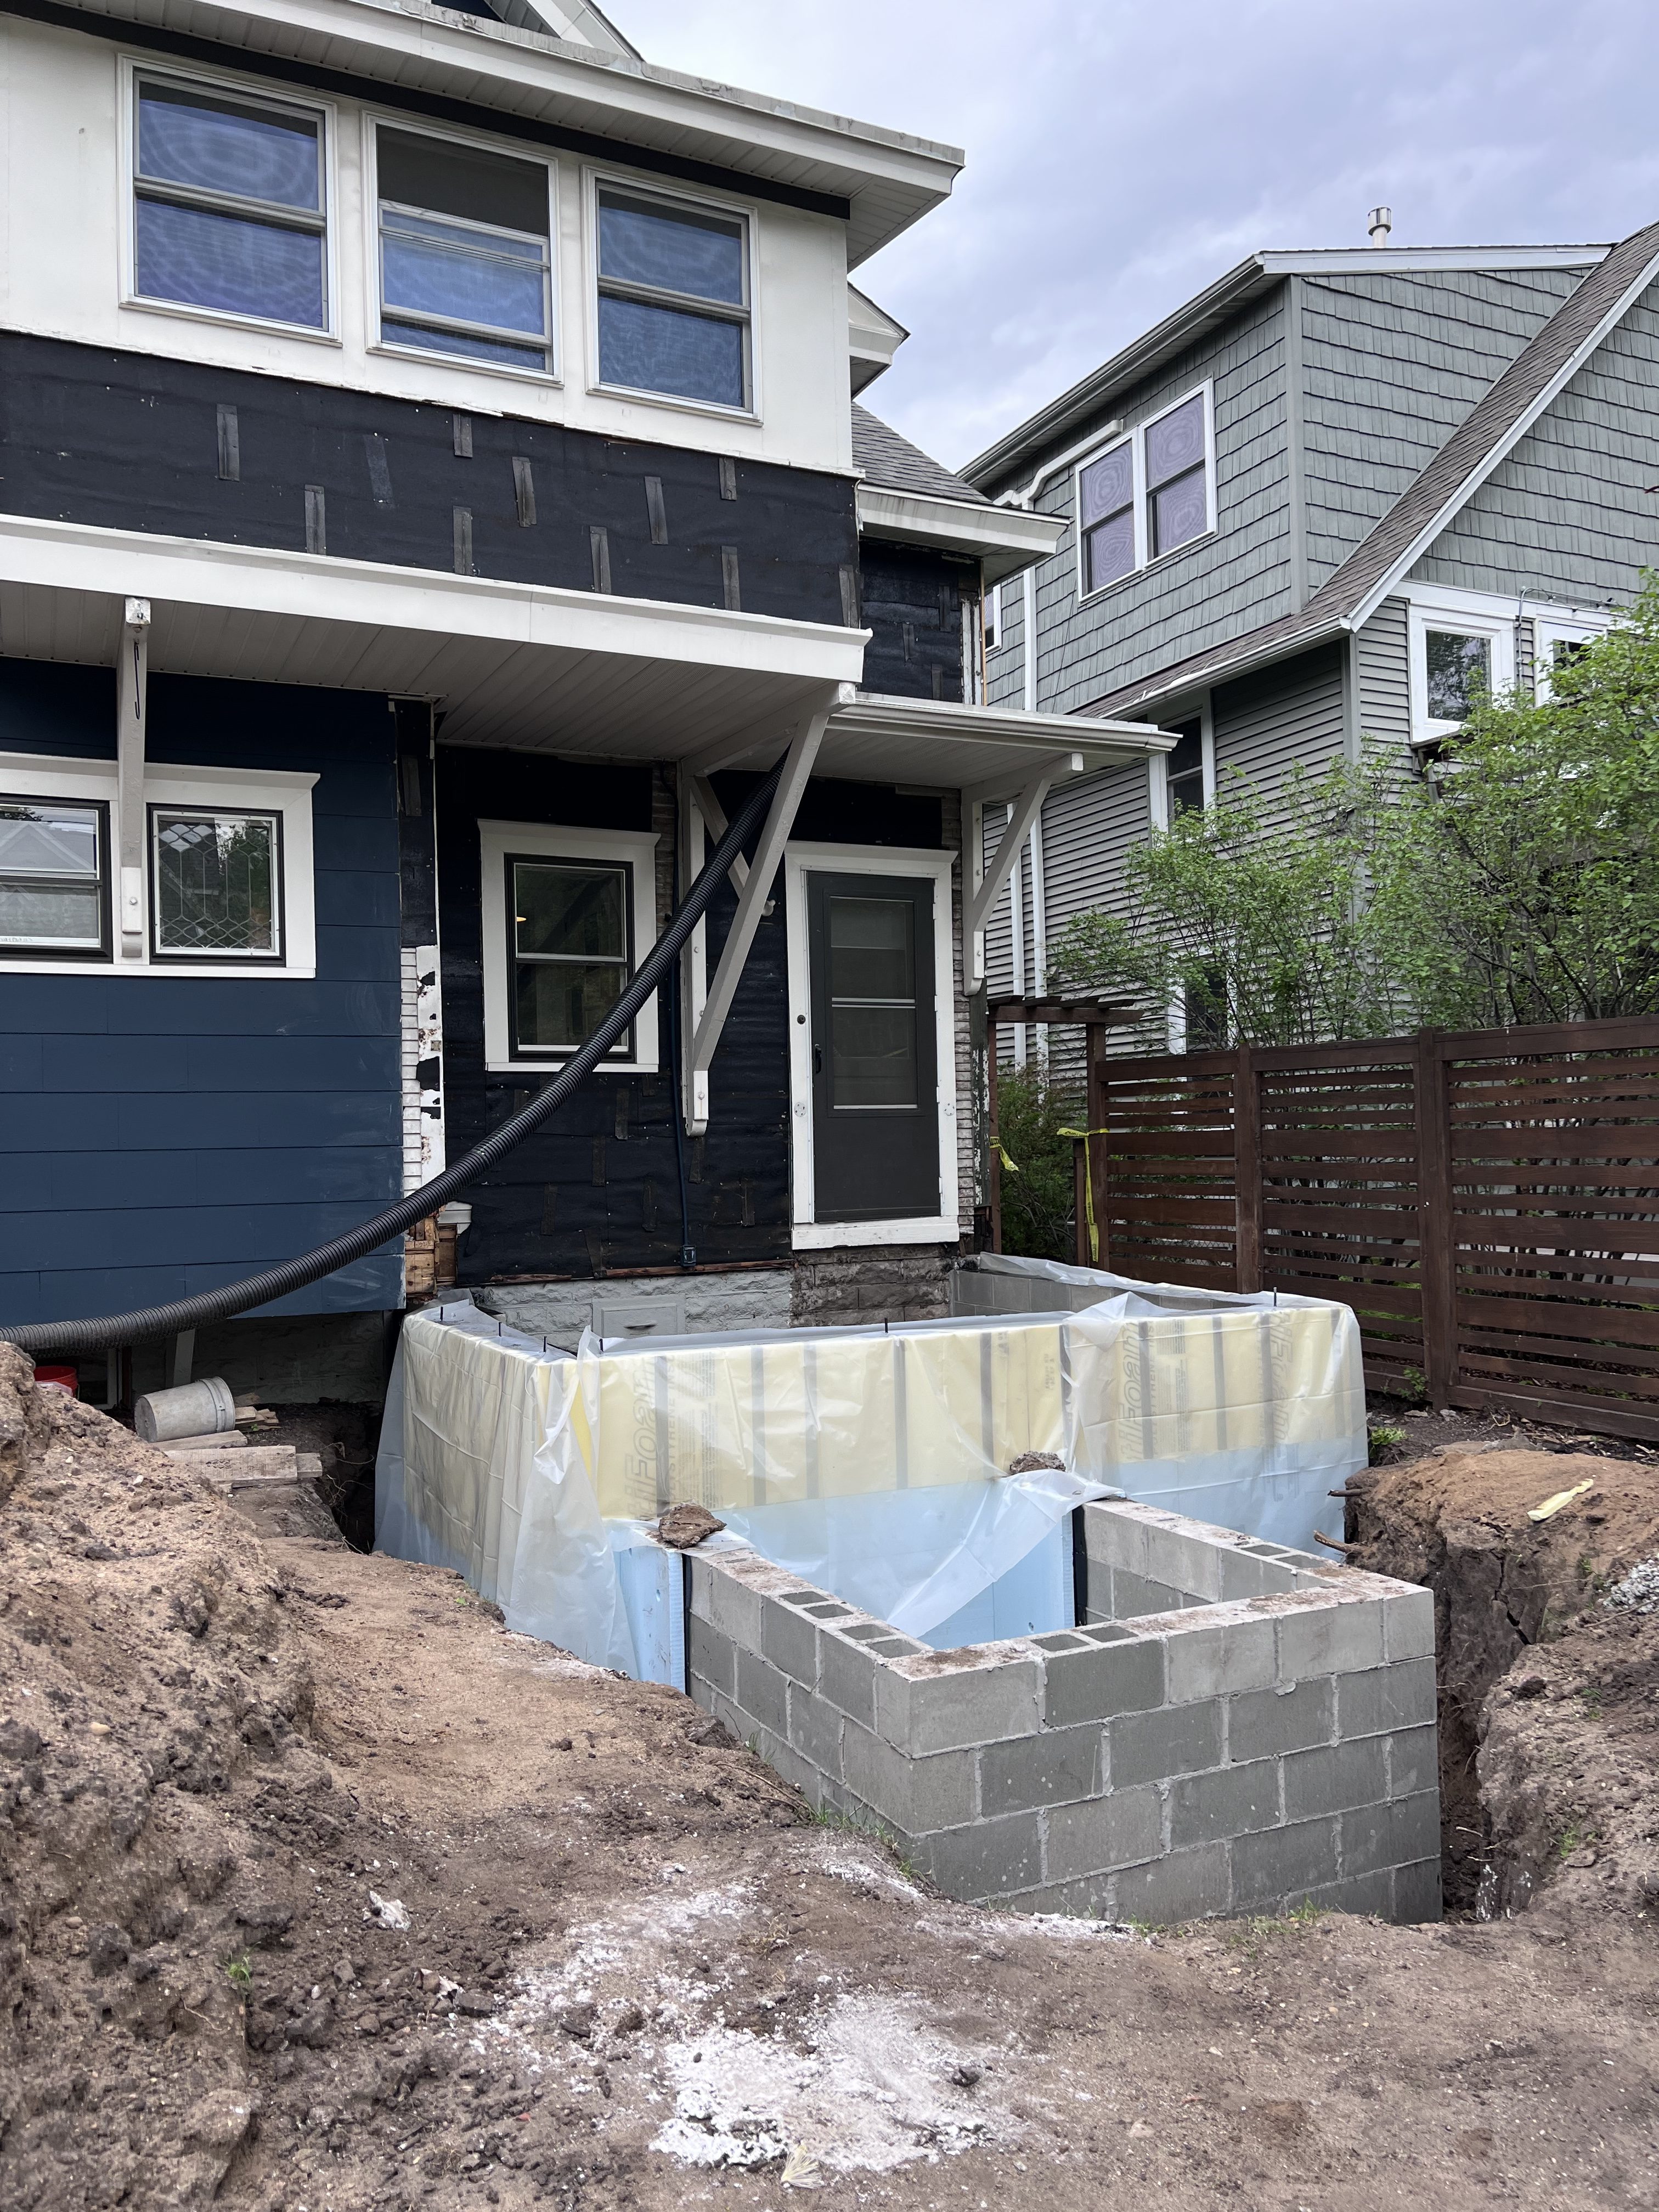 Foundation is water-proofed and insulated